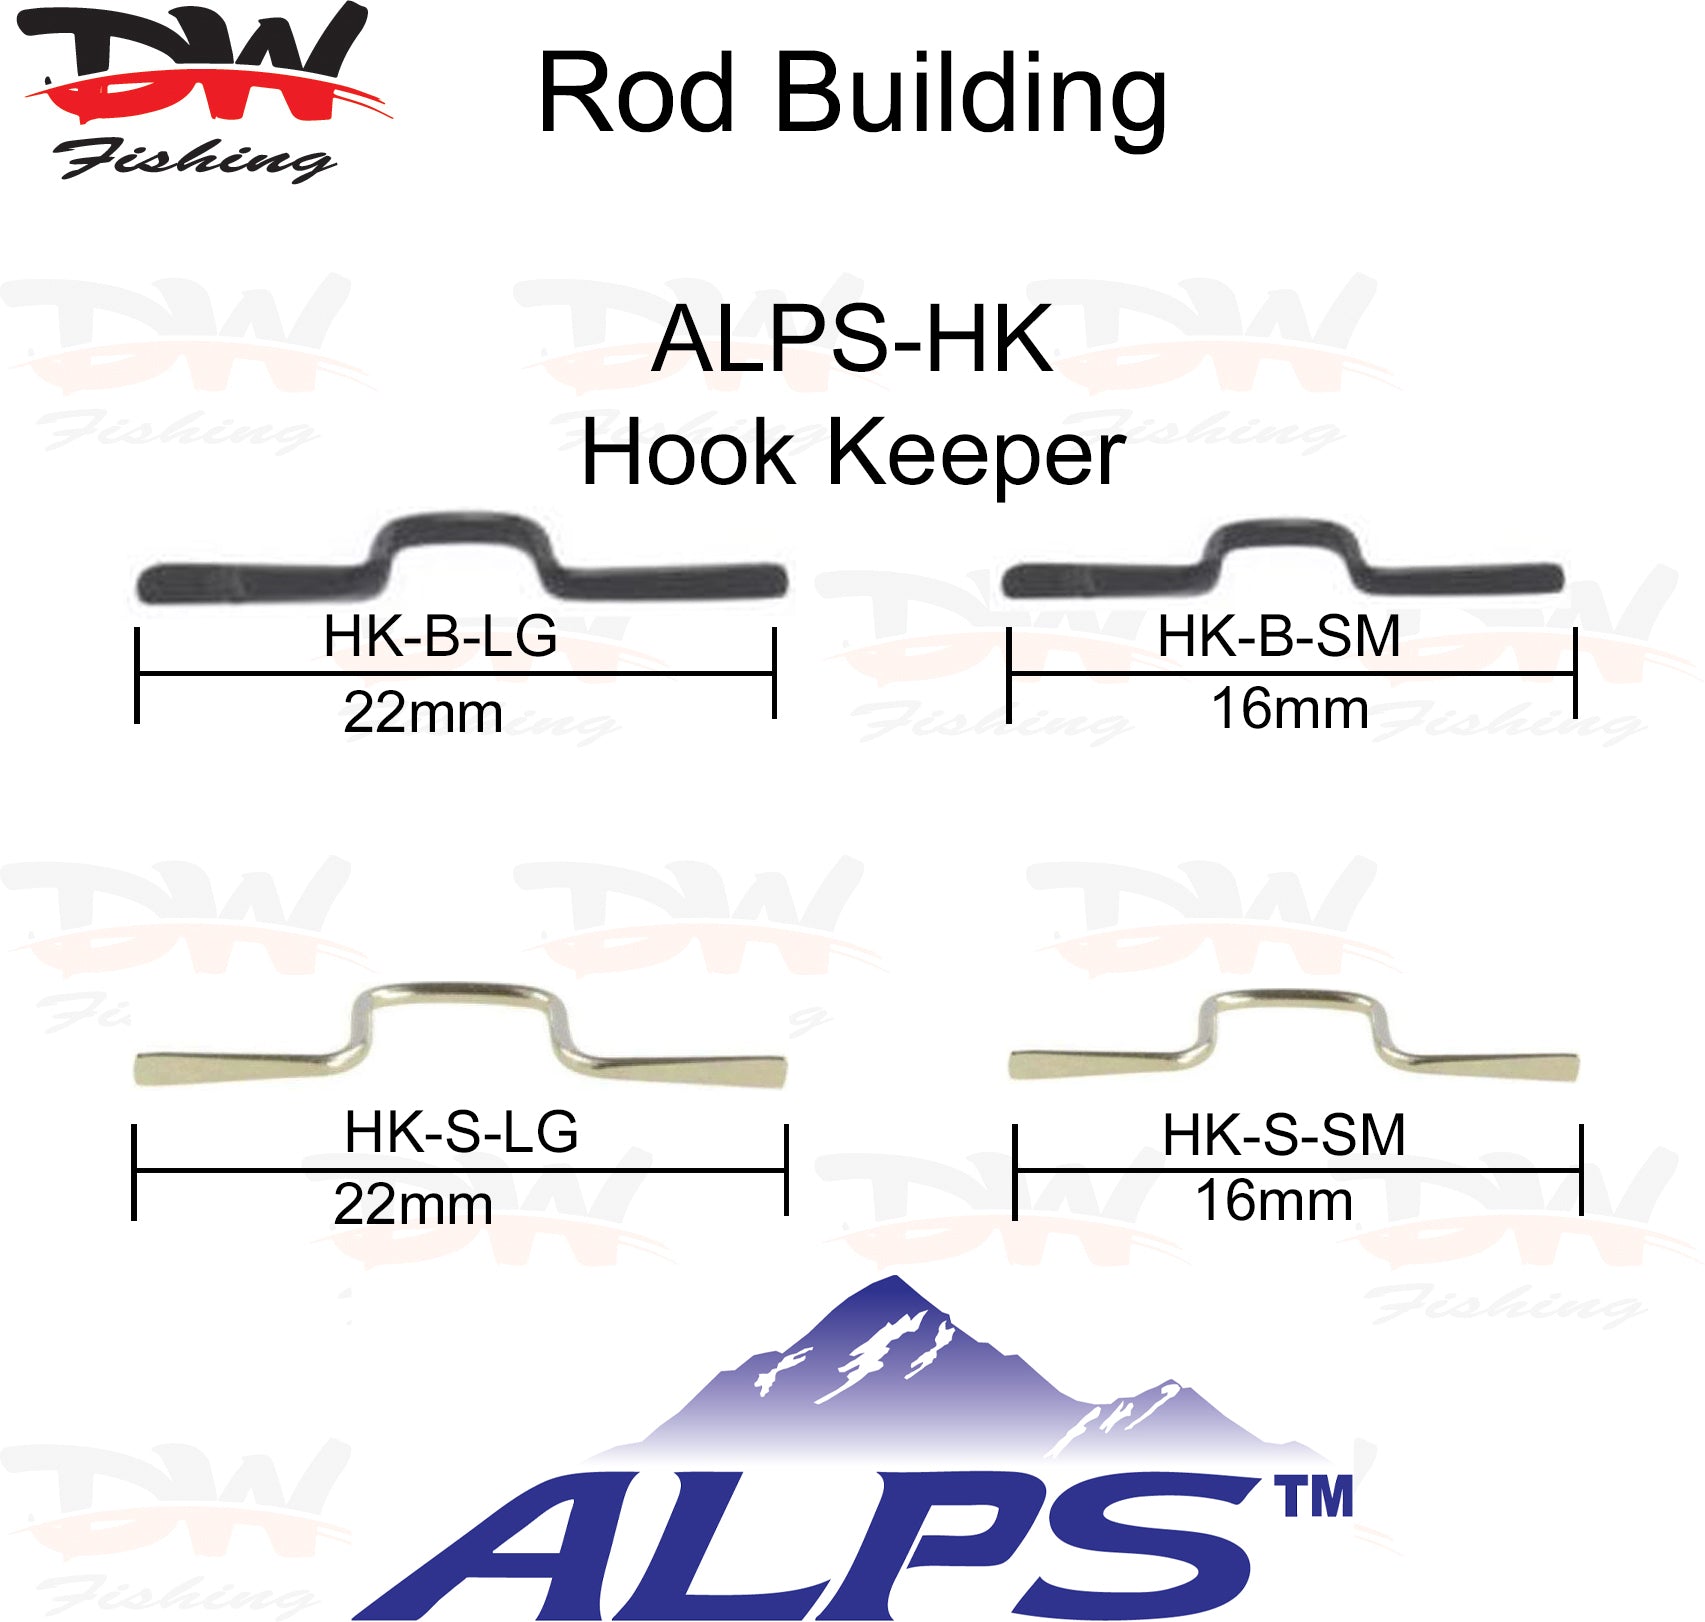 ALPS Stainless steel hook keeper black and silver colection